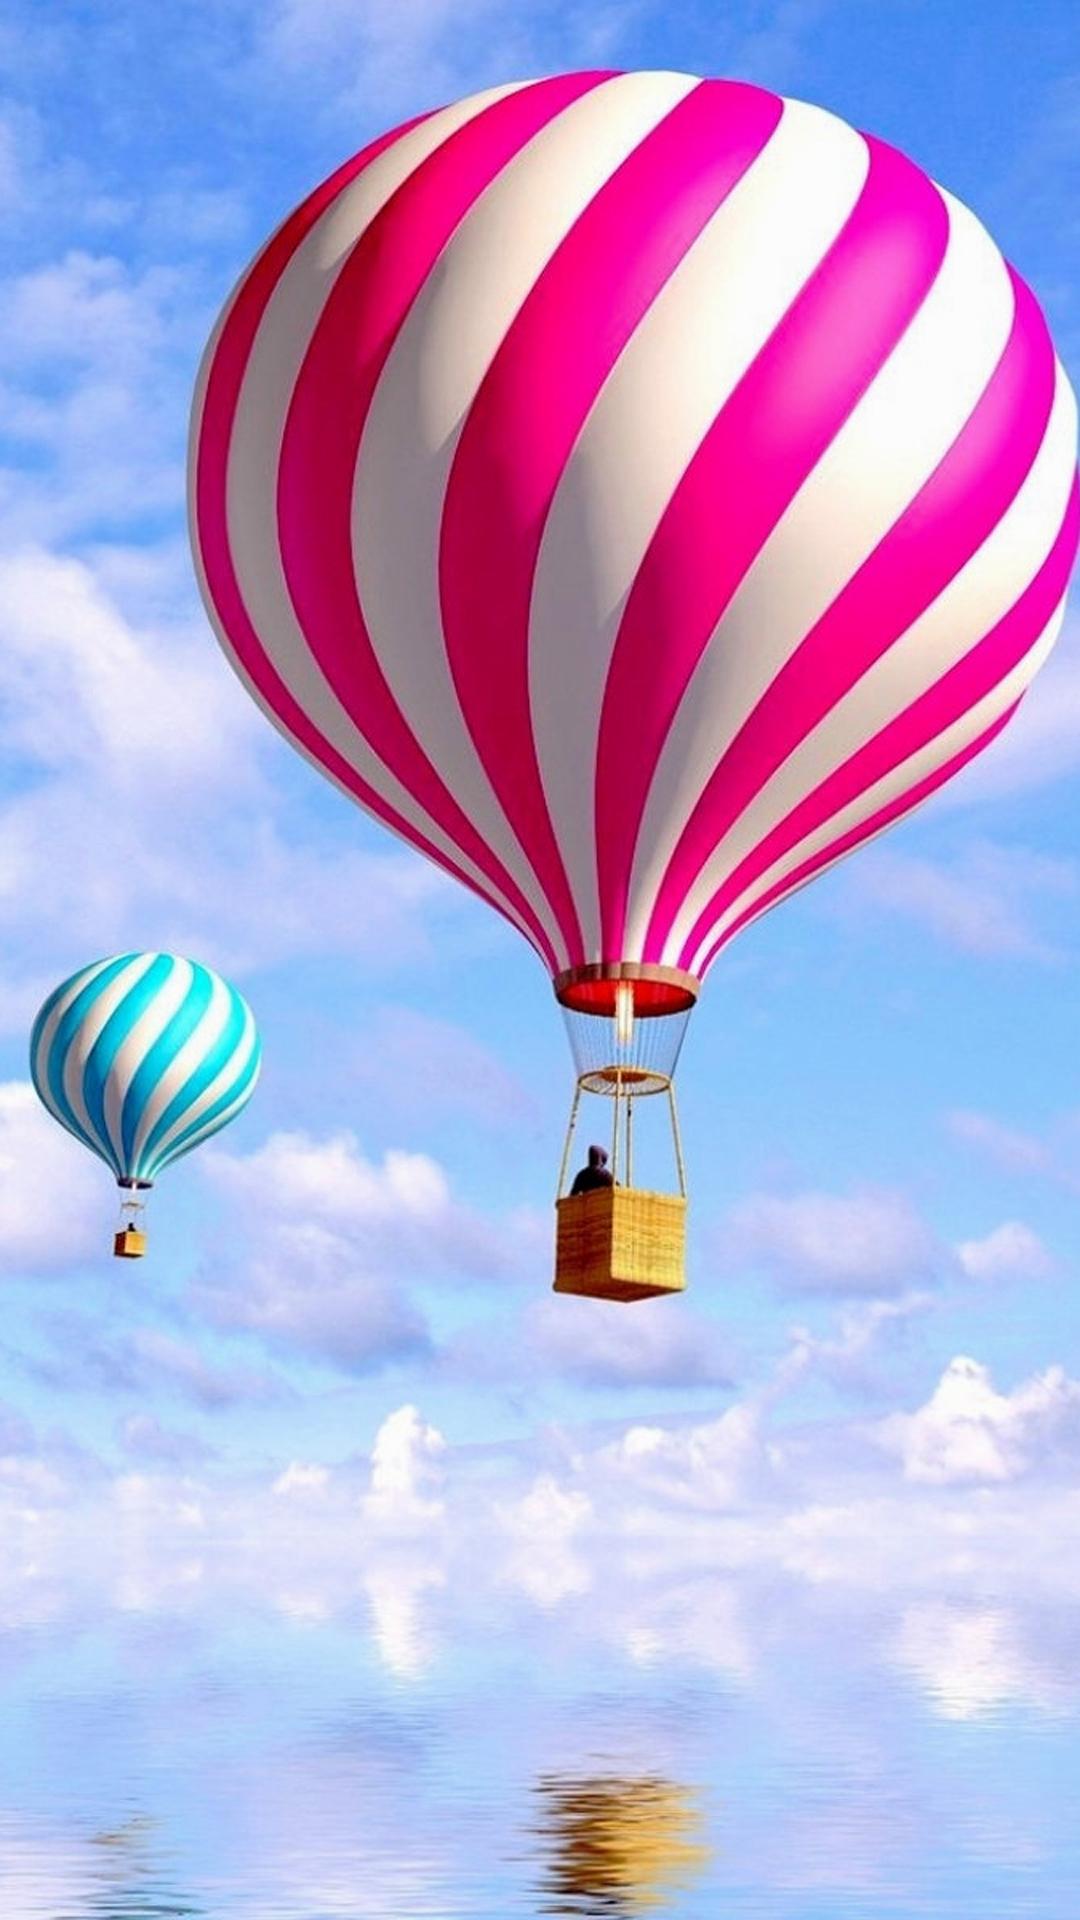 hot hd wallpaper for android,hot air balloon,hot air ballooning,balloon,mode of transport,air sports